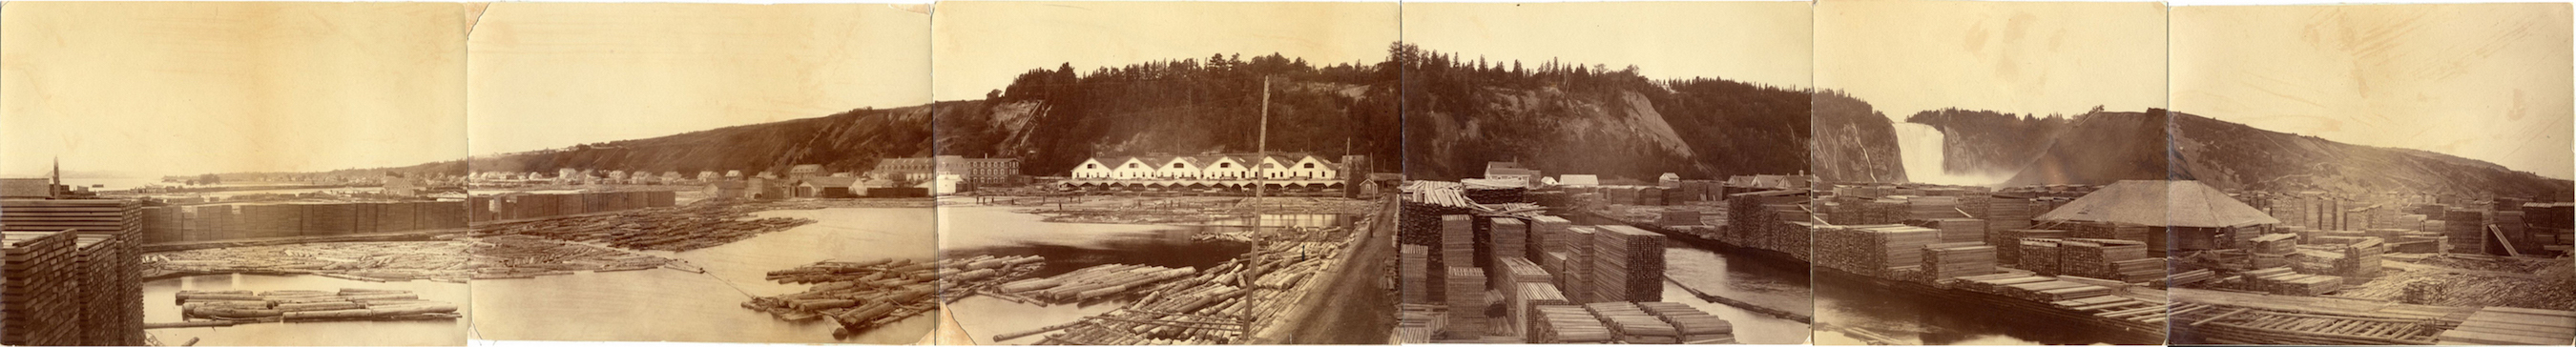 Sepia archival photos assembled to create a panoramic view. The first shot shows dozens of stacks of timber as well as logs floating in the pools at the foot of the Montmorency Falls just to the right, in the background. Several buildings can be seen at the base of the cliff.